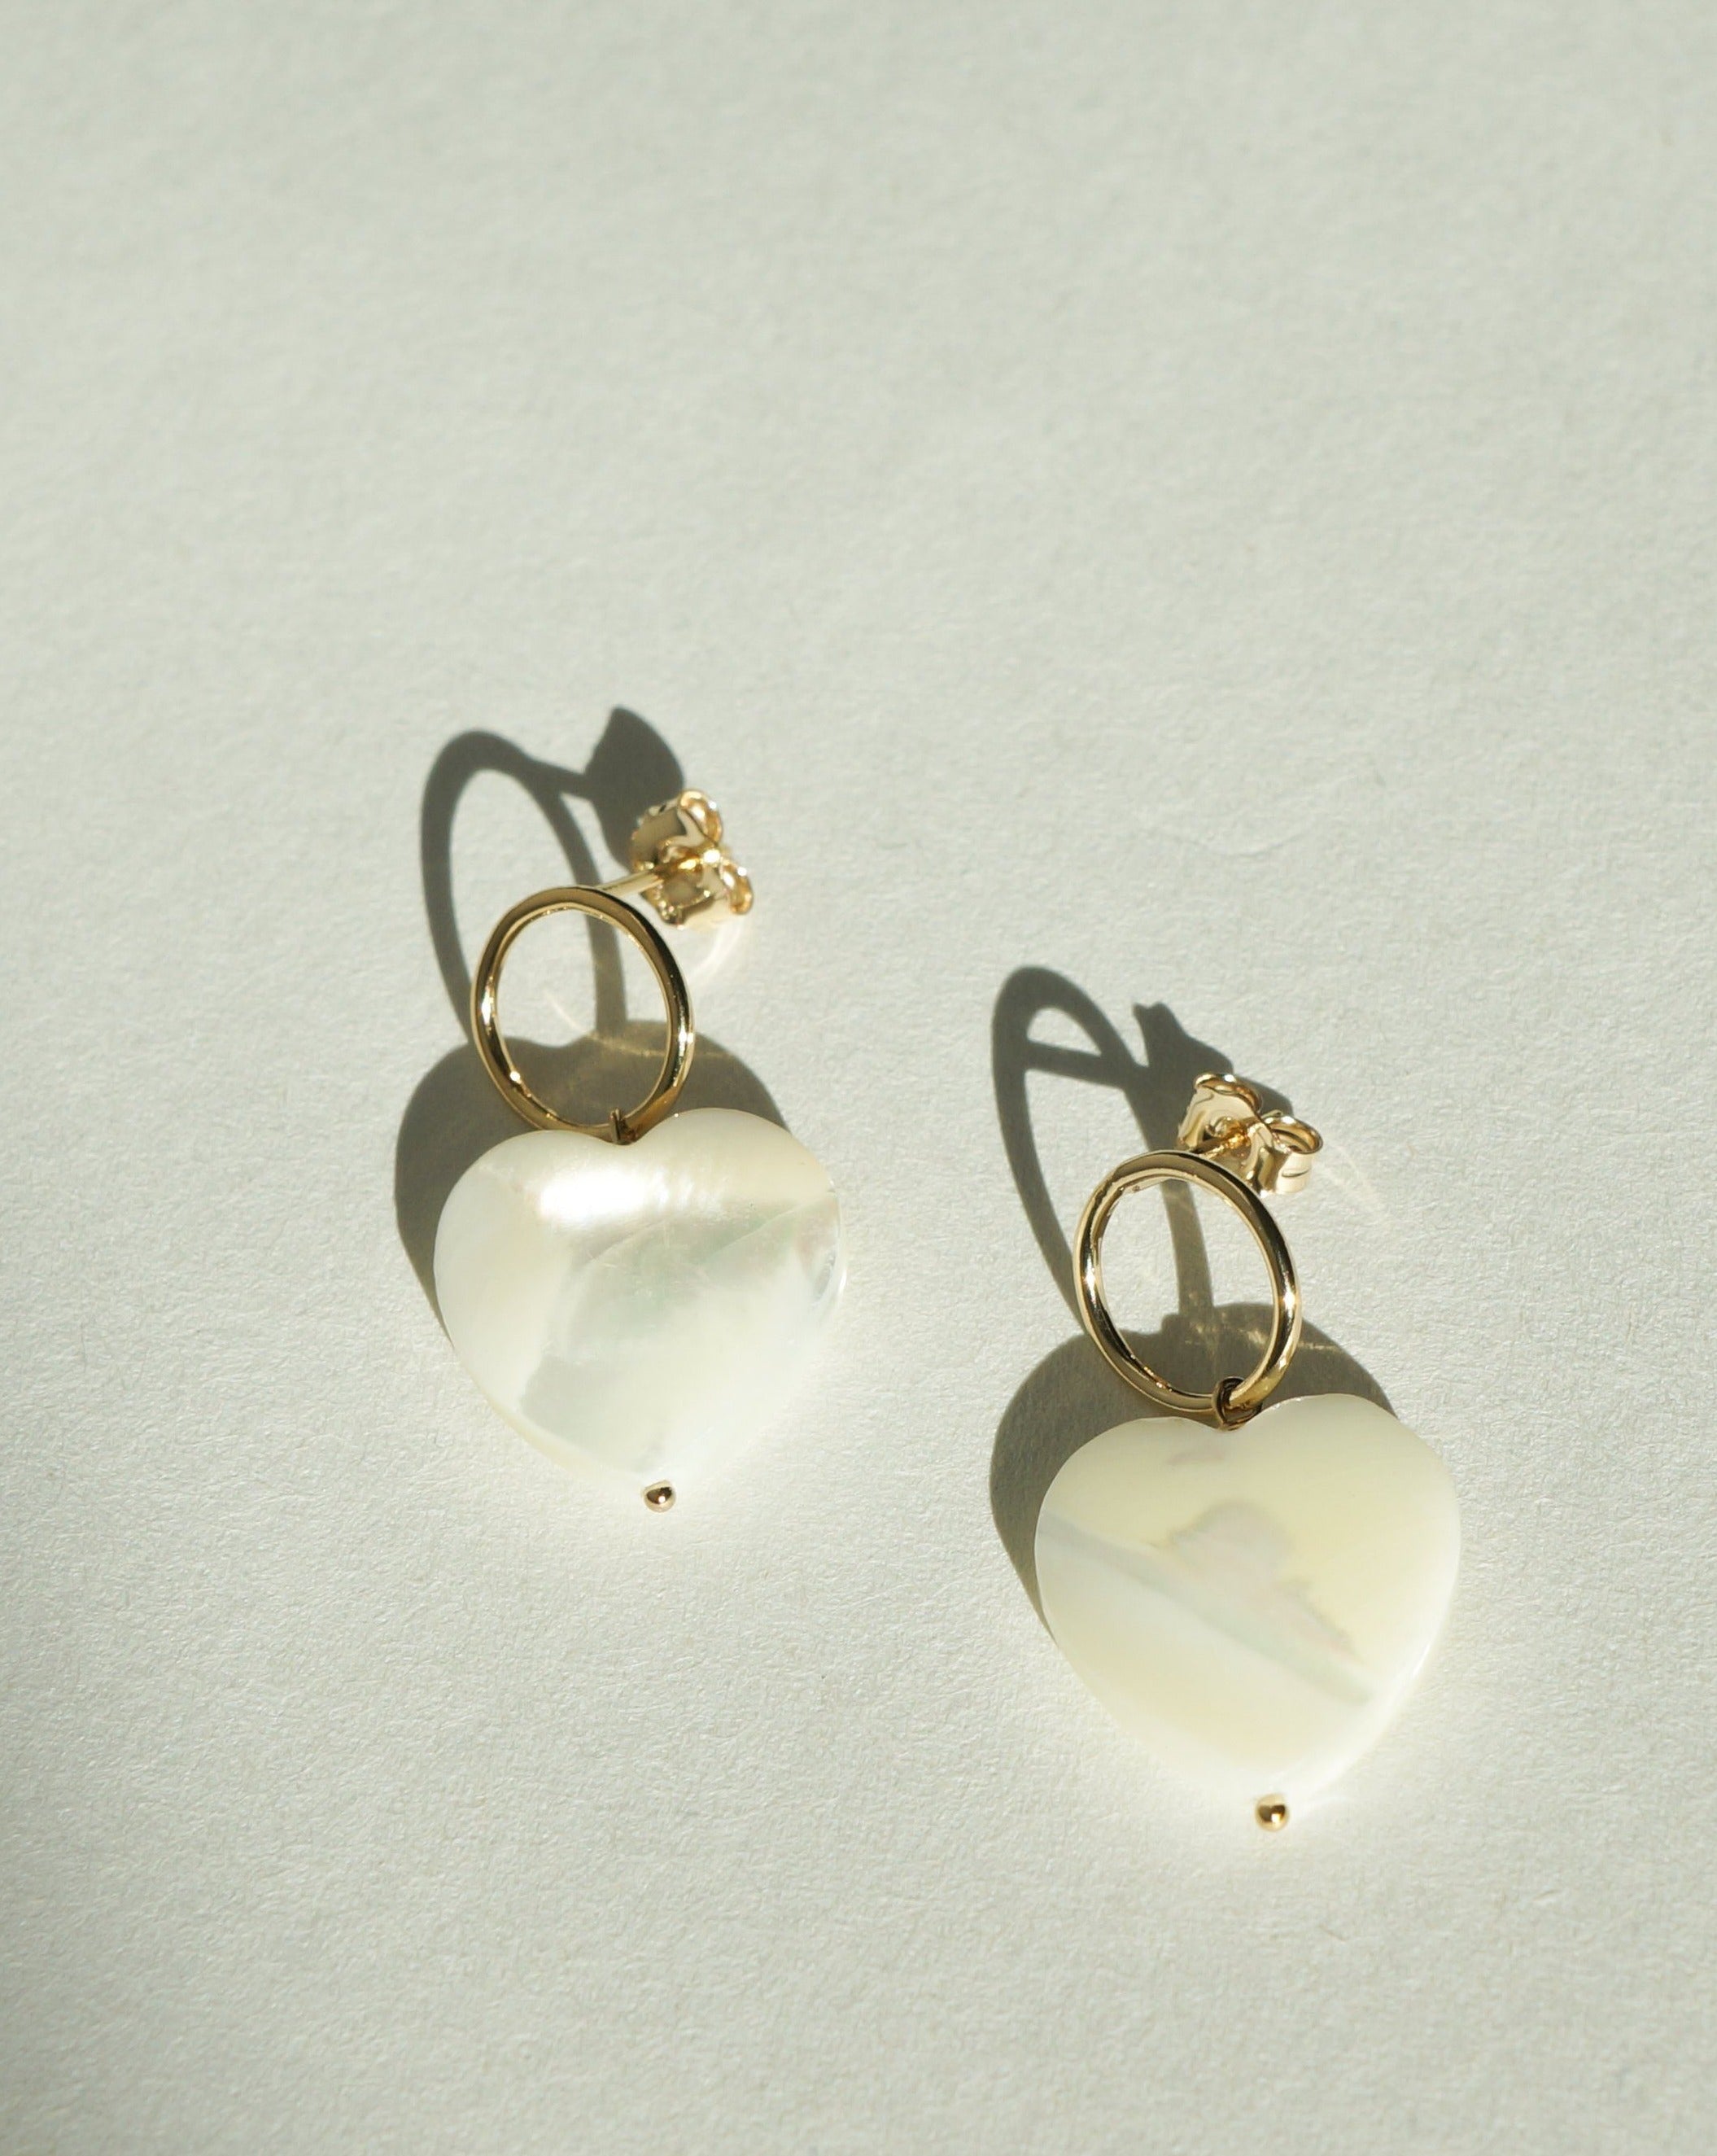 Heart Earrings by KOZAKH. Stud earrings, crafted in 14K Gold Filled, with hoop and hand carved faceted Mother of Pearl heart charm.